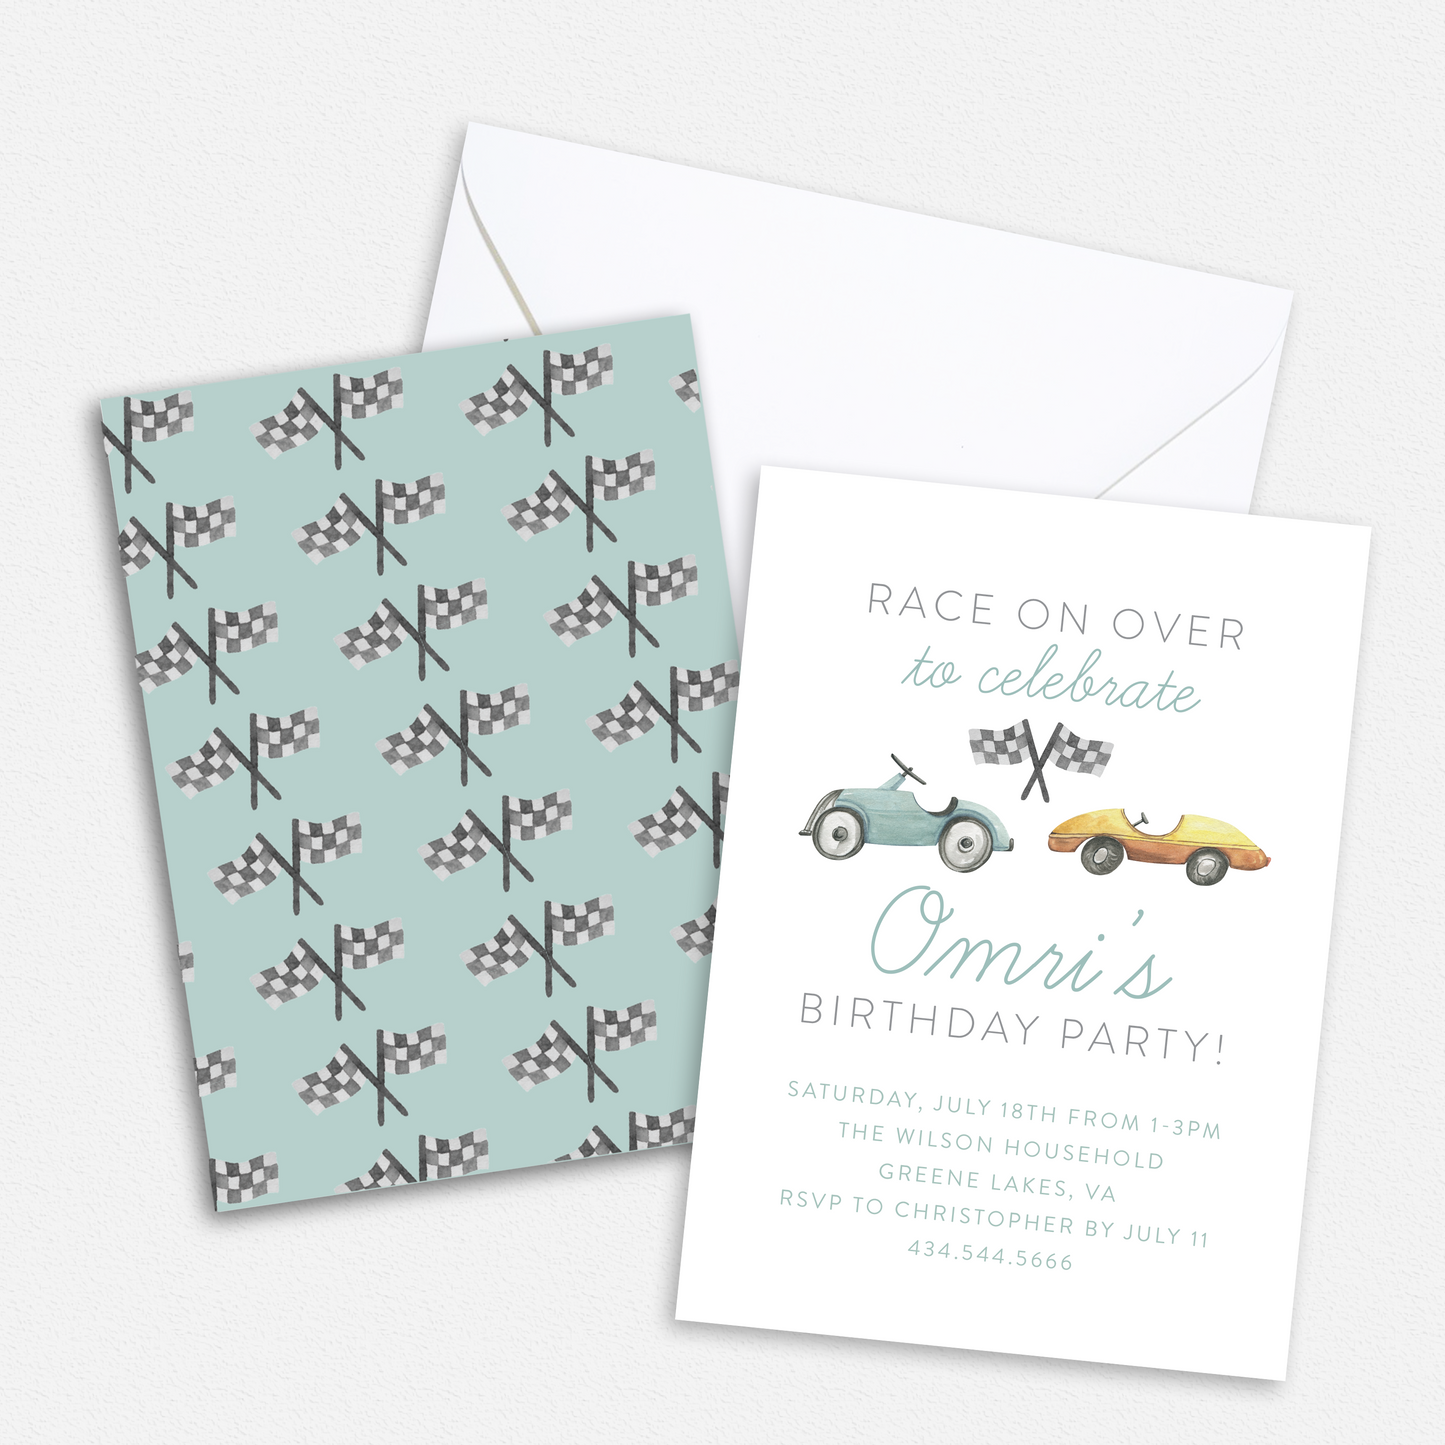 Vintage Race Car Birthday Party Invitation - Custom OR Fill-in-the-Blank - Set of 25